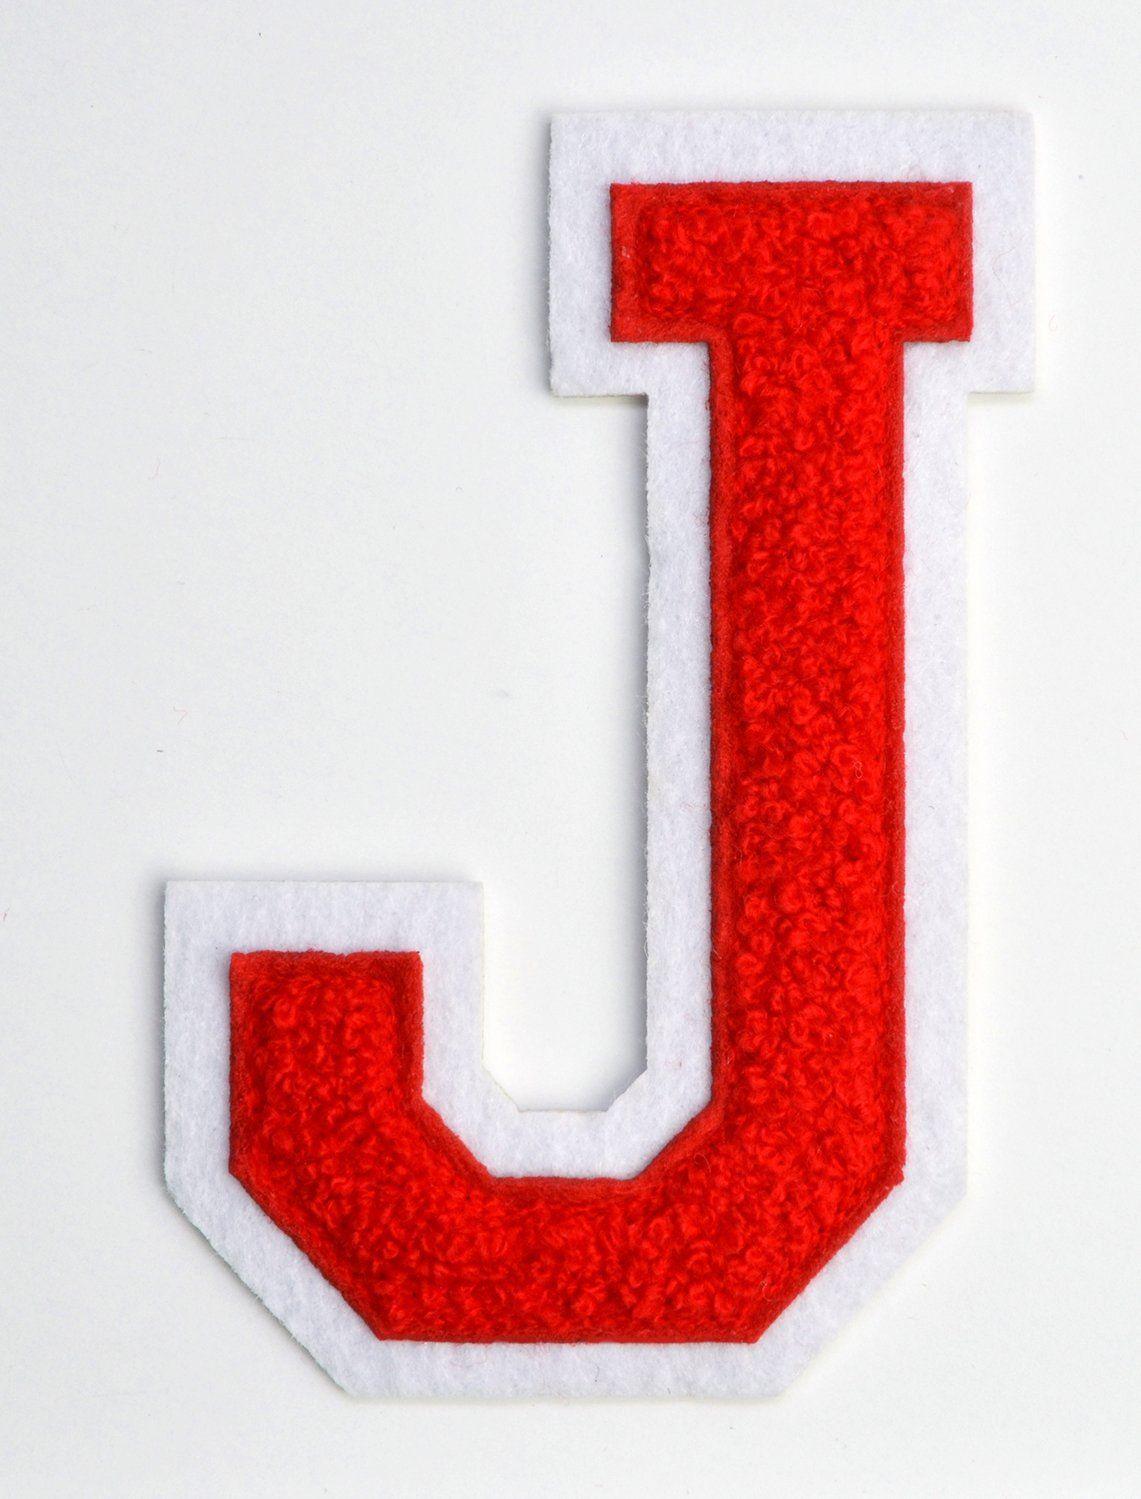 Red Letter J Logo - Amazon.com: Varsity Letter Patches - Red Embroidered Chenille ...